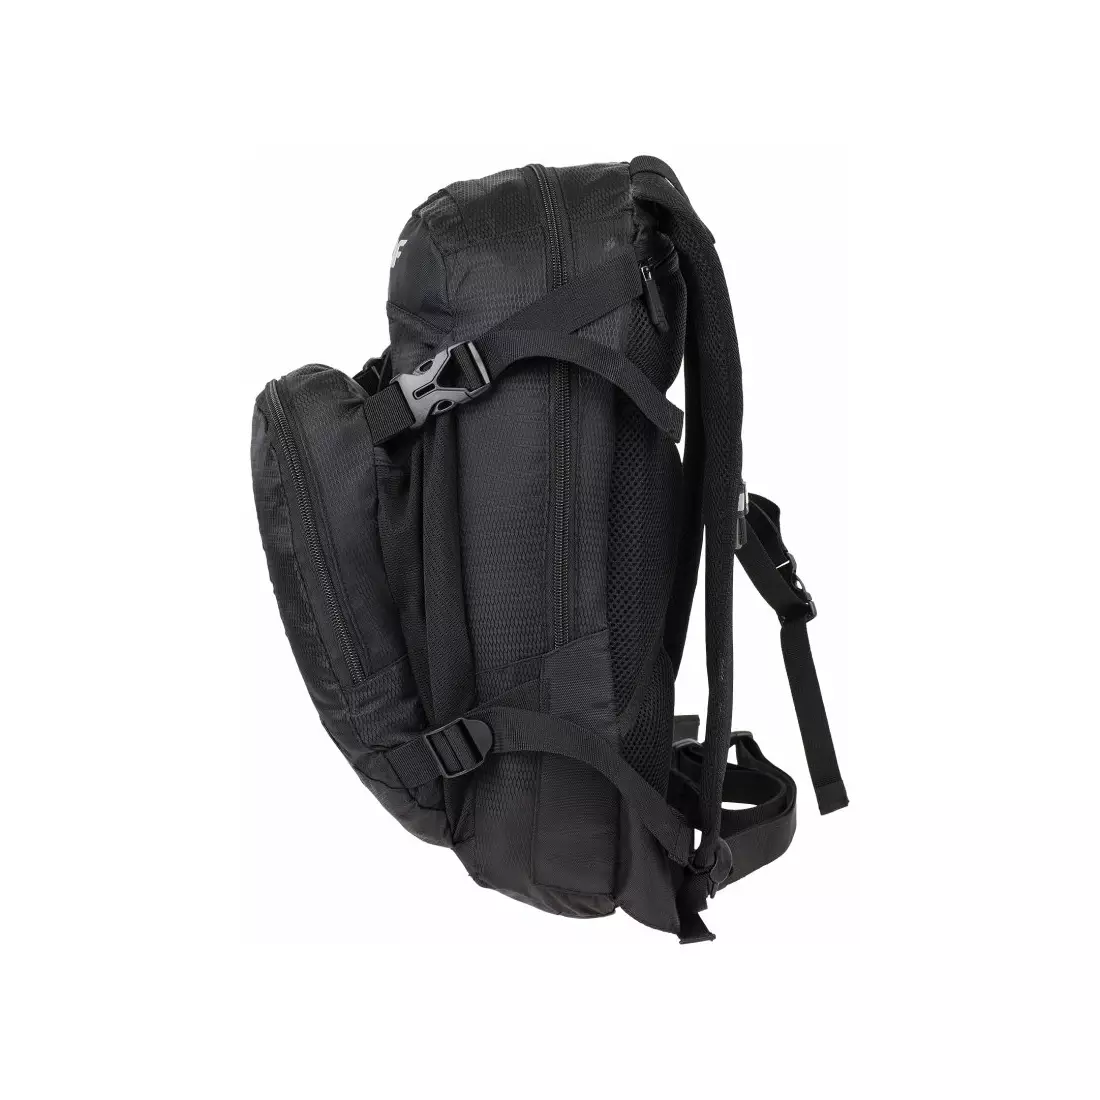 4F SS15 PCR003 black bicycle backpack